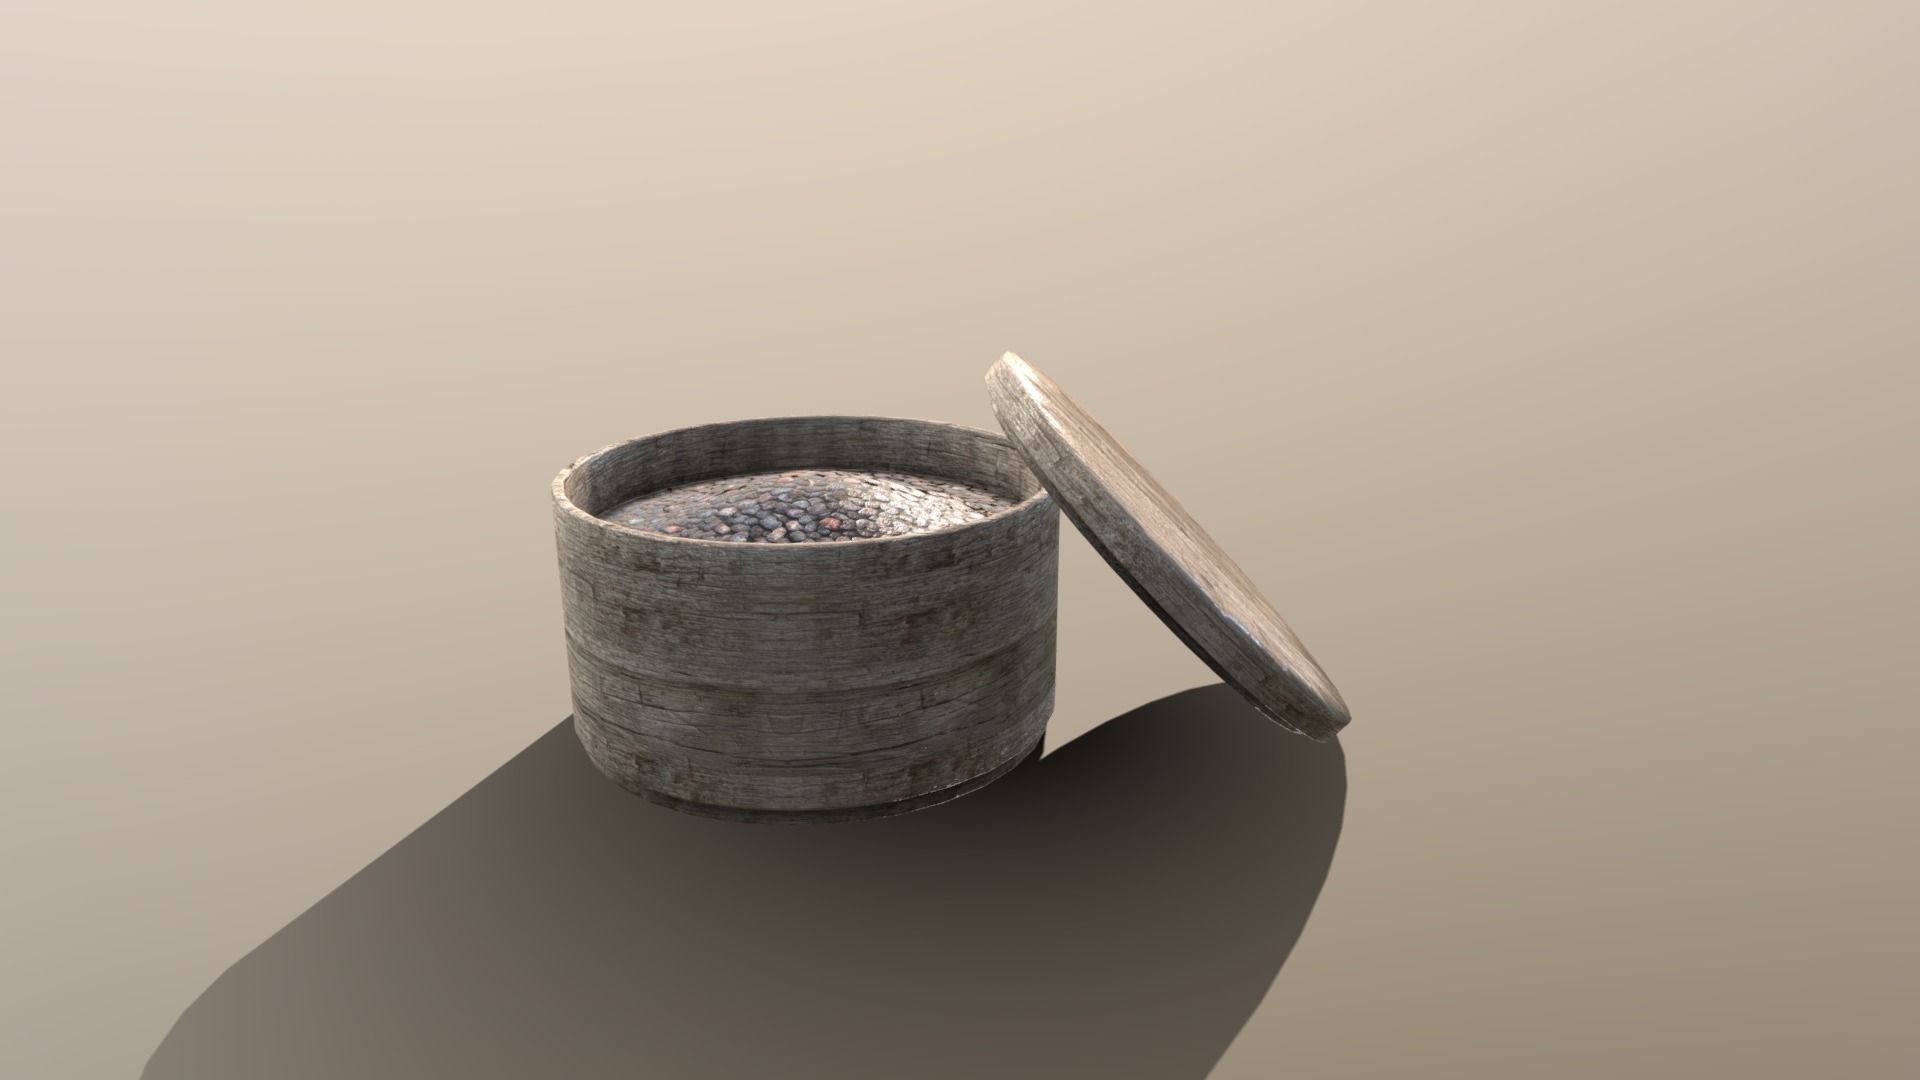 3D model Pepper Pinch Pot - This is a 3D model of the Pepper Pinch Pot. The 3D model is about a wooden ring on a table.